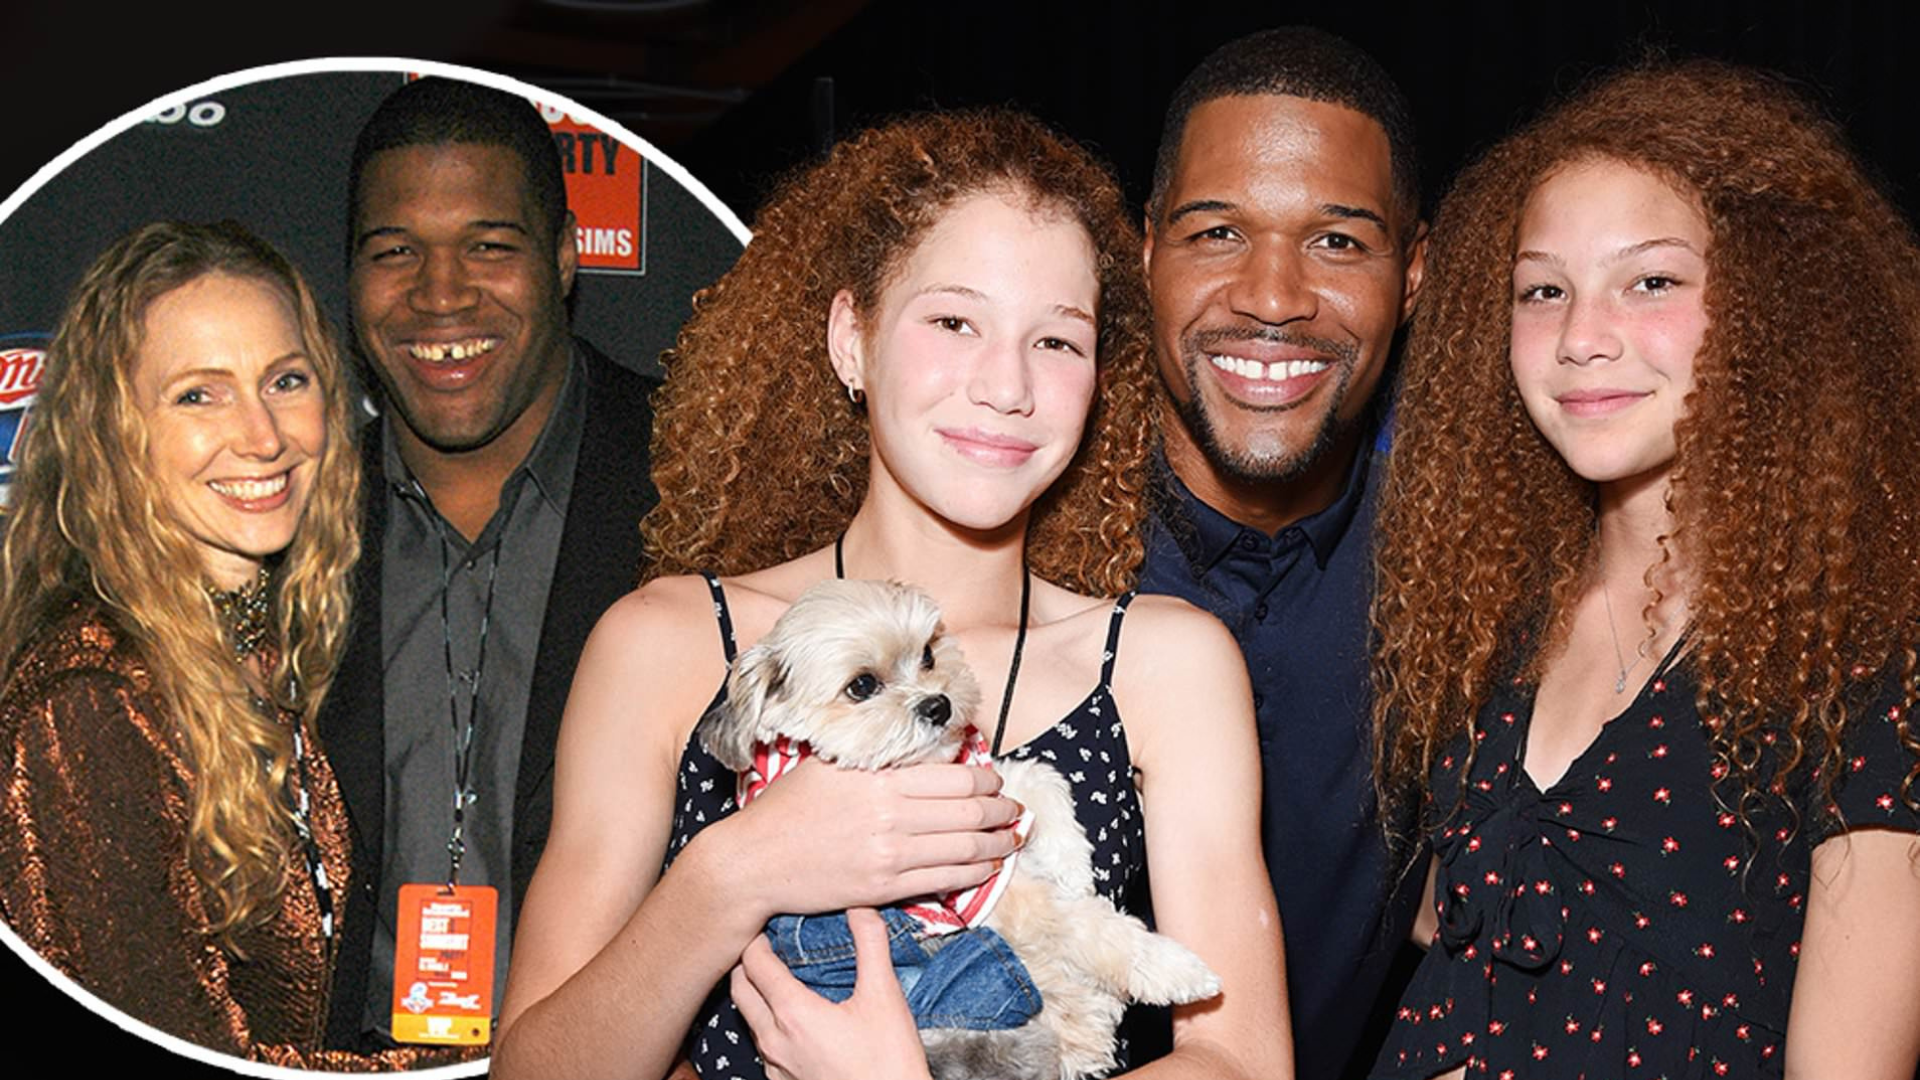 Jean Muggli and Michael Strahan happily together on the left and Michael Strahan with his twin on the right